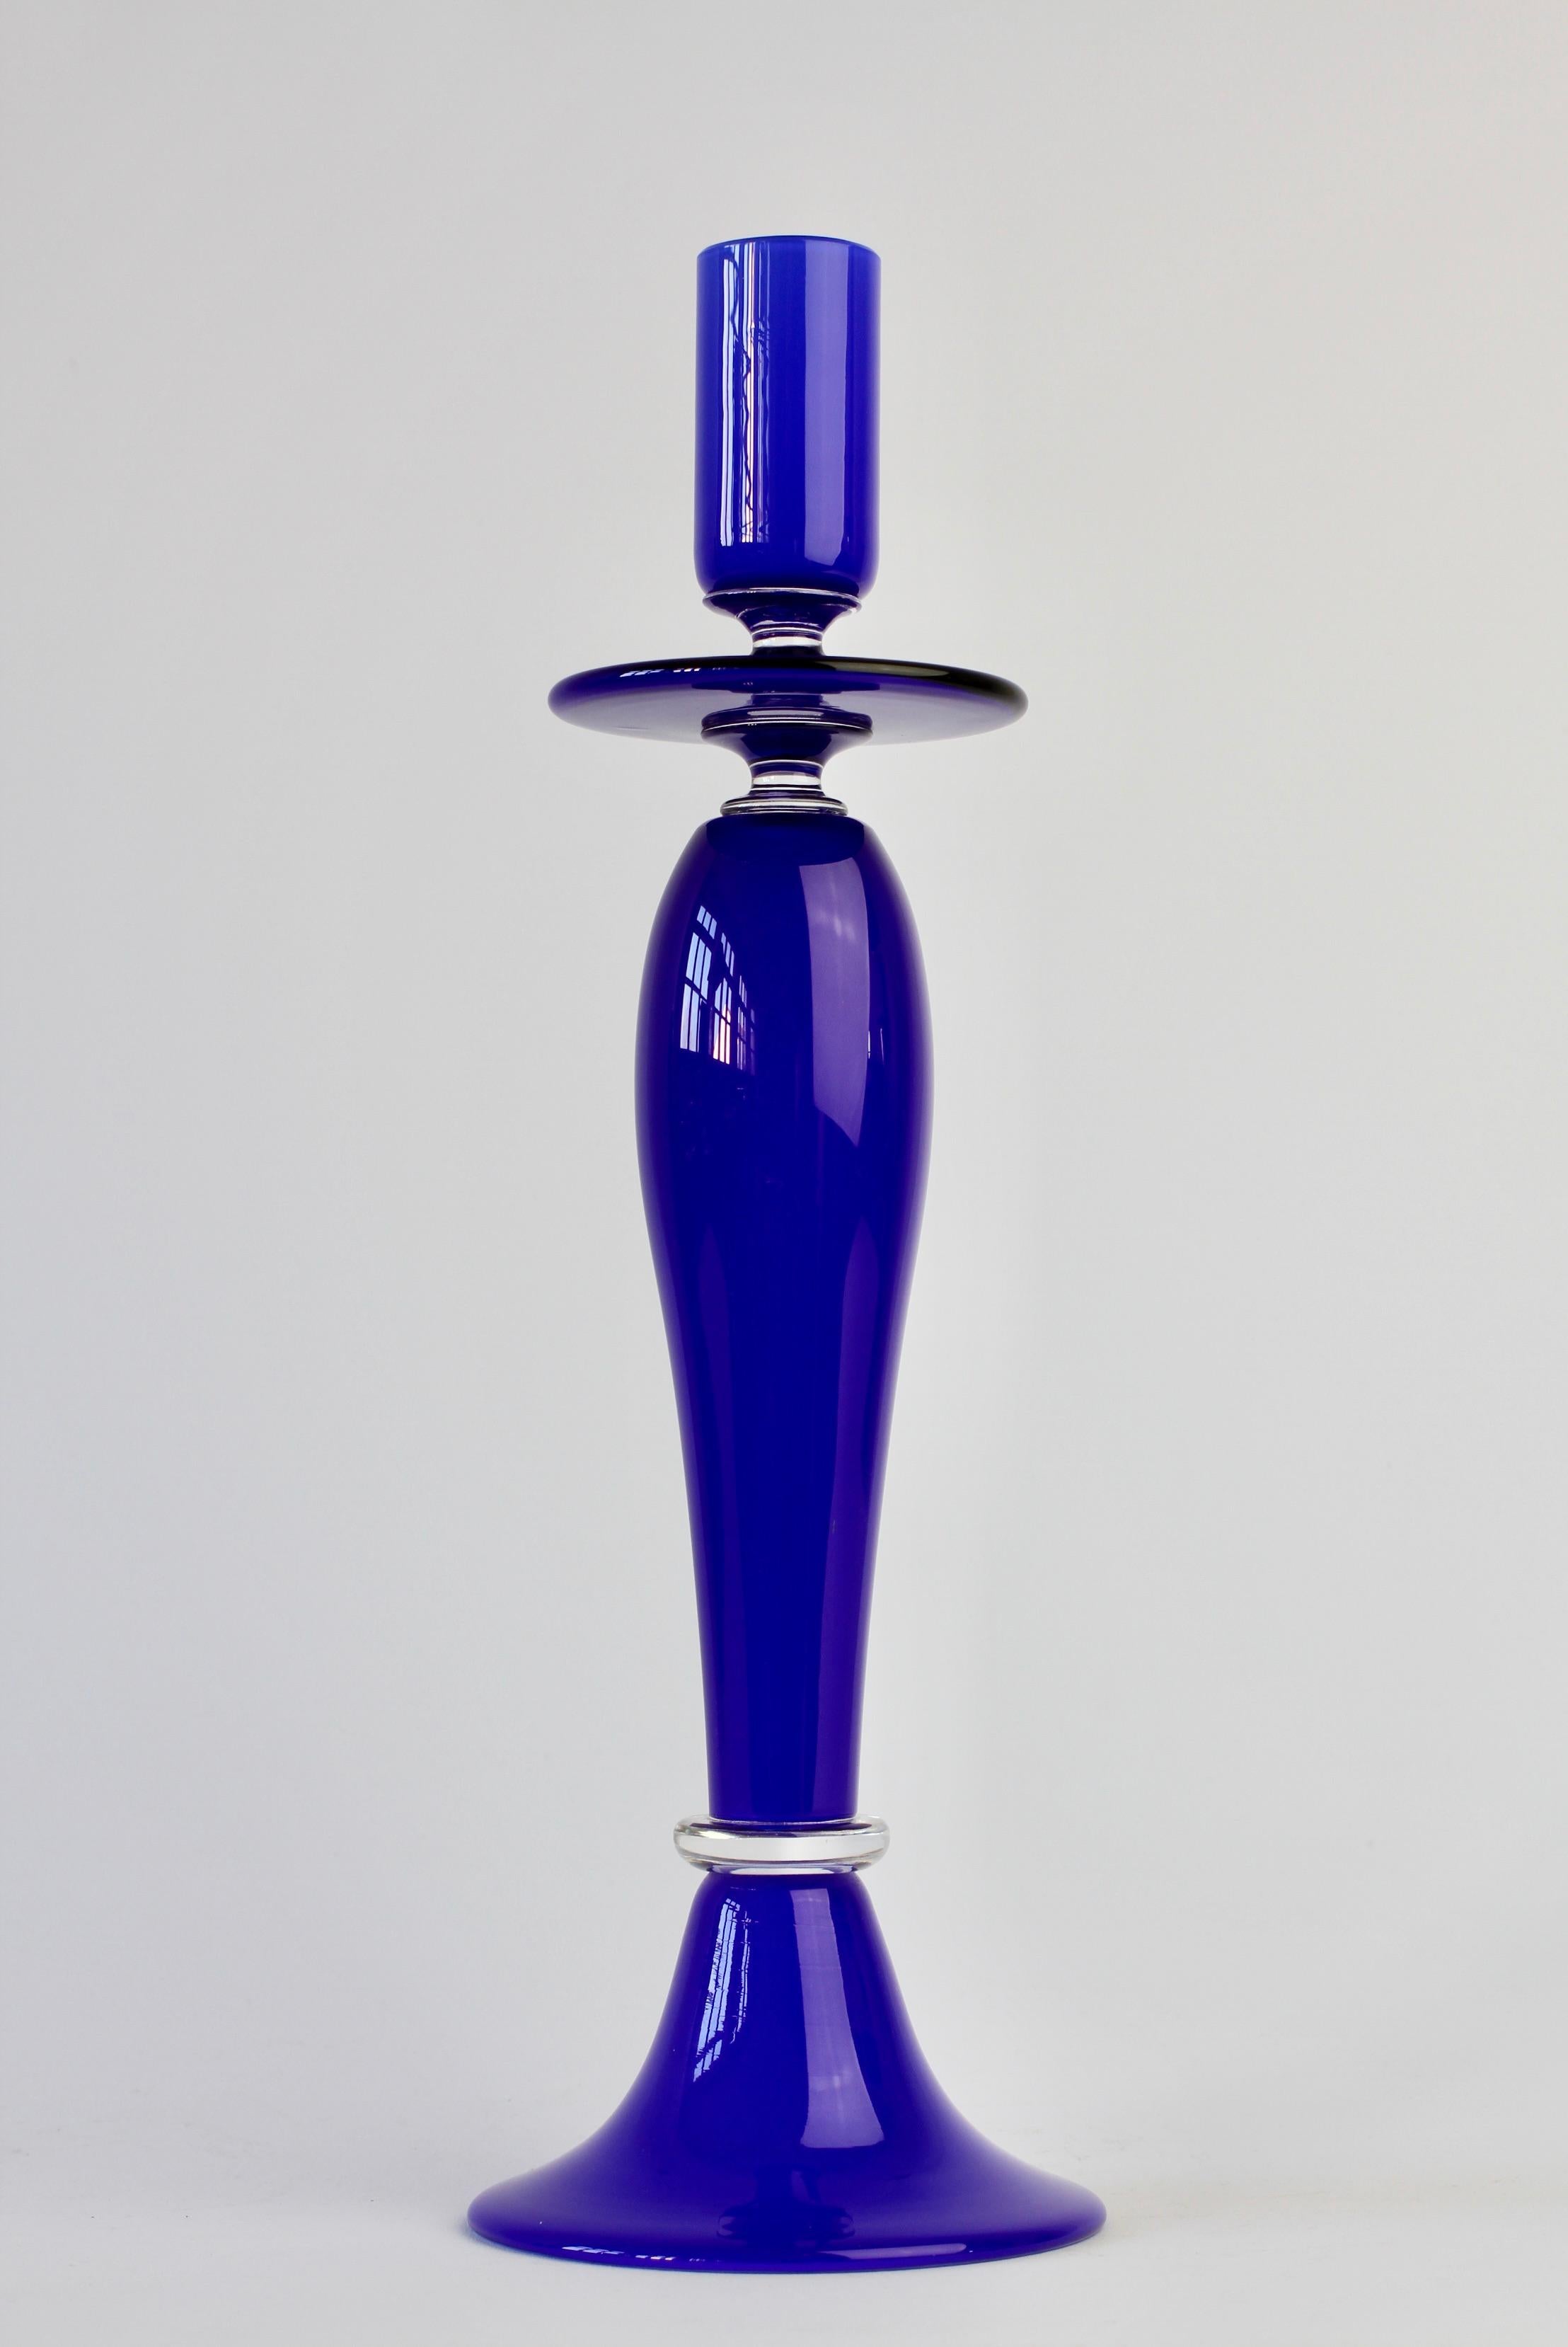 Cobalt blue colored (colored) and clear Italian Murano glass candlestick holder 'signed' by Cenedese with original labels. Beautiful craftsmanship and stunning color.

Candleholder measures - 32cm (12.59 inches) by 10.3cm (4.03inches) at the